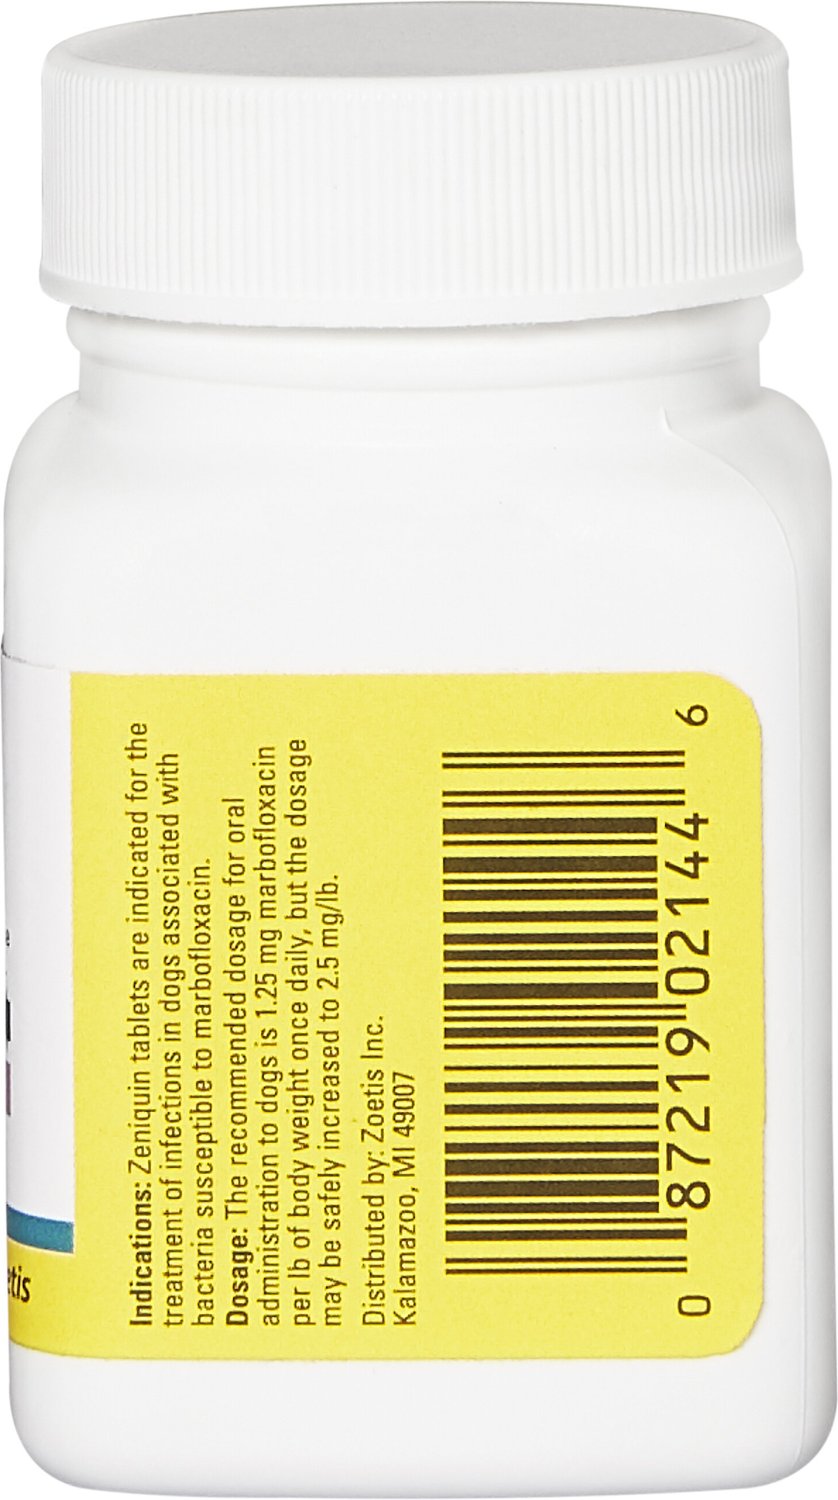 Zeniquin Tablets for Dogs & Cats, 100mg, 1 tablet